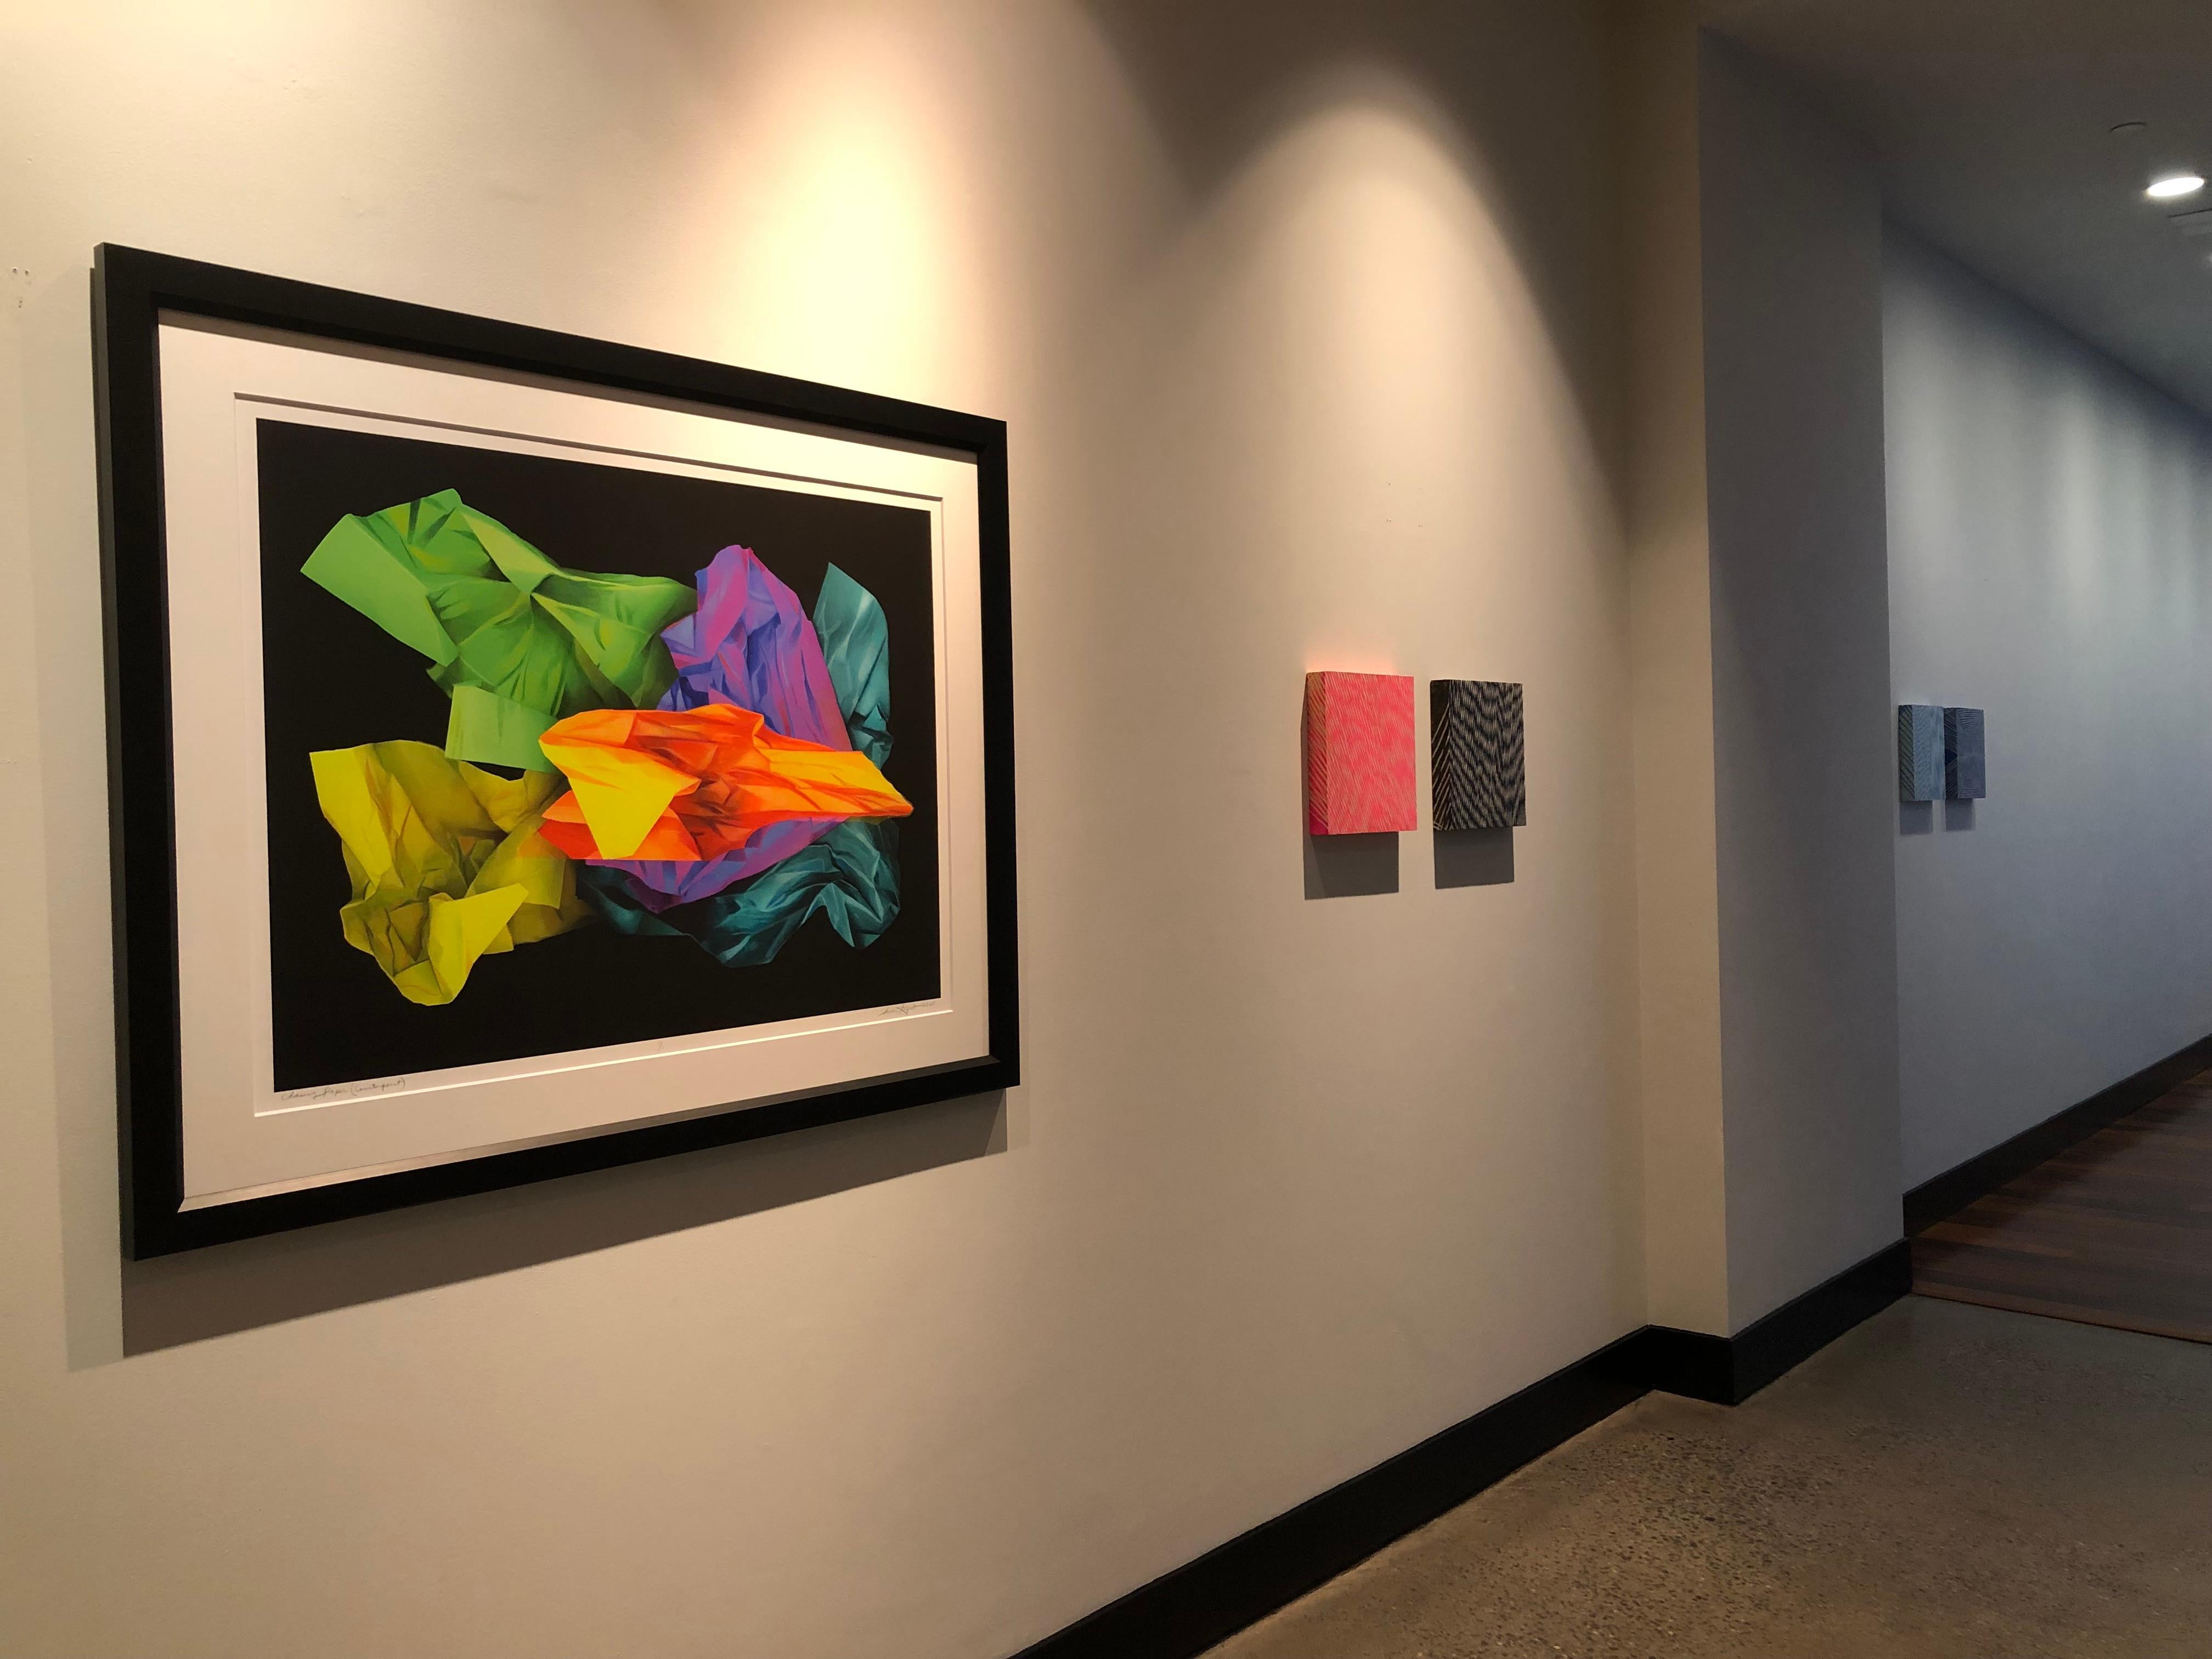 Color and line are imbued with taste and aroma in Mel Prest’s linear abstractions. Her recent works experiment with interference, fluorescents, metallics, and mica, subtly altering the light conditions and the flavor palette of her panels. Kinetic